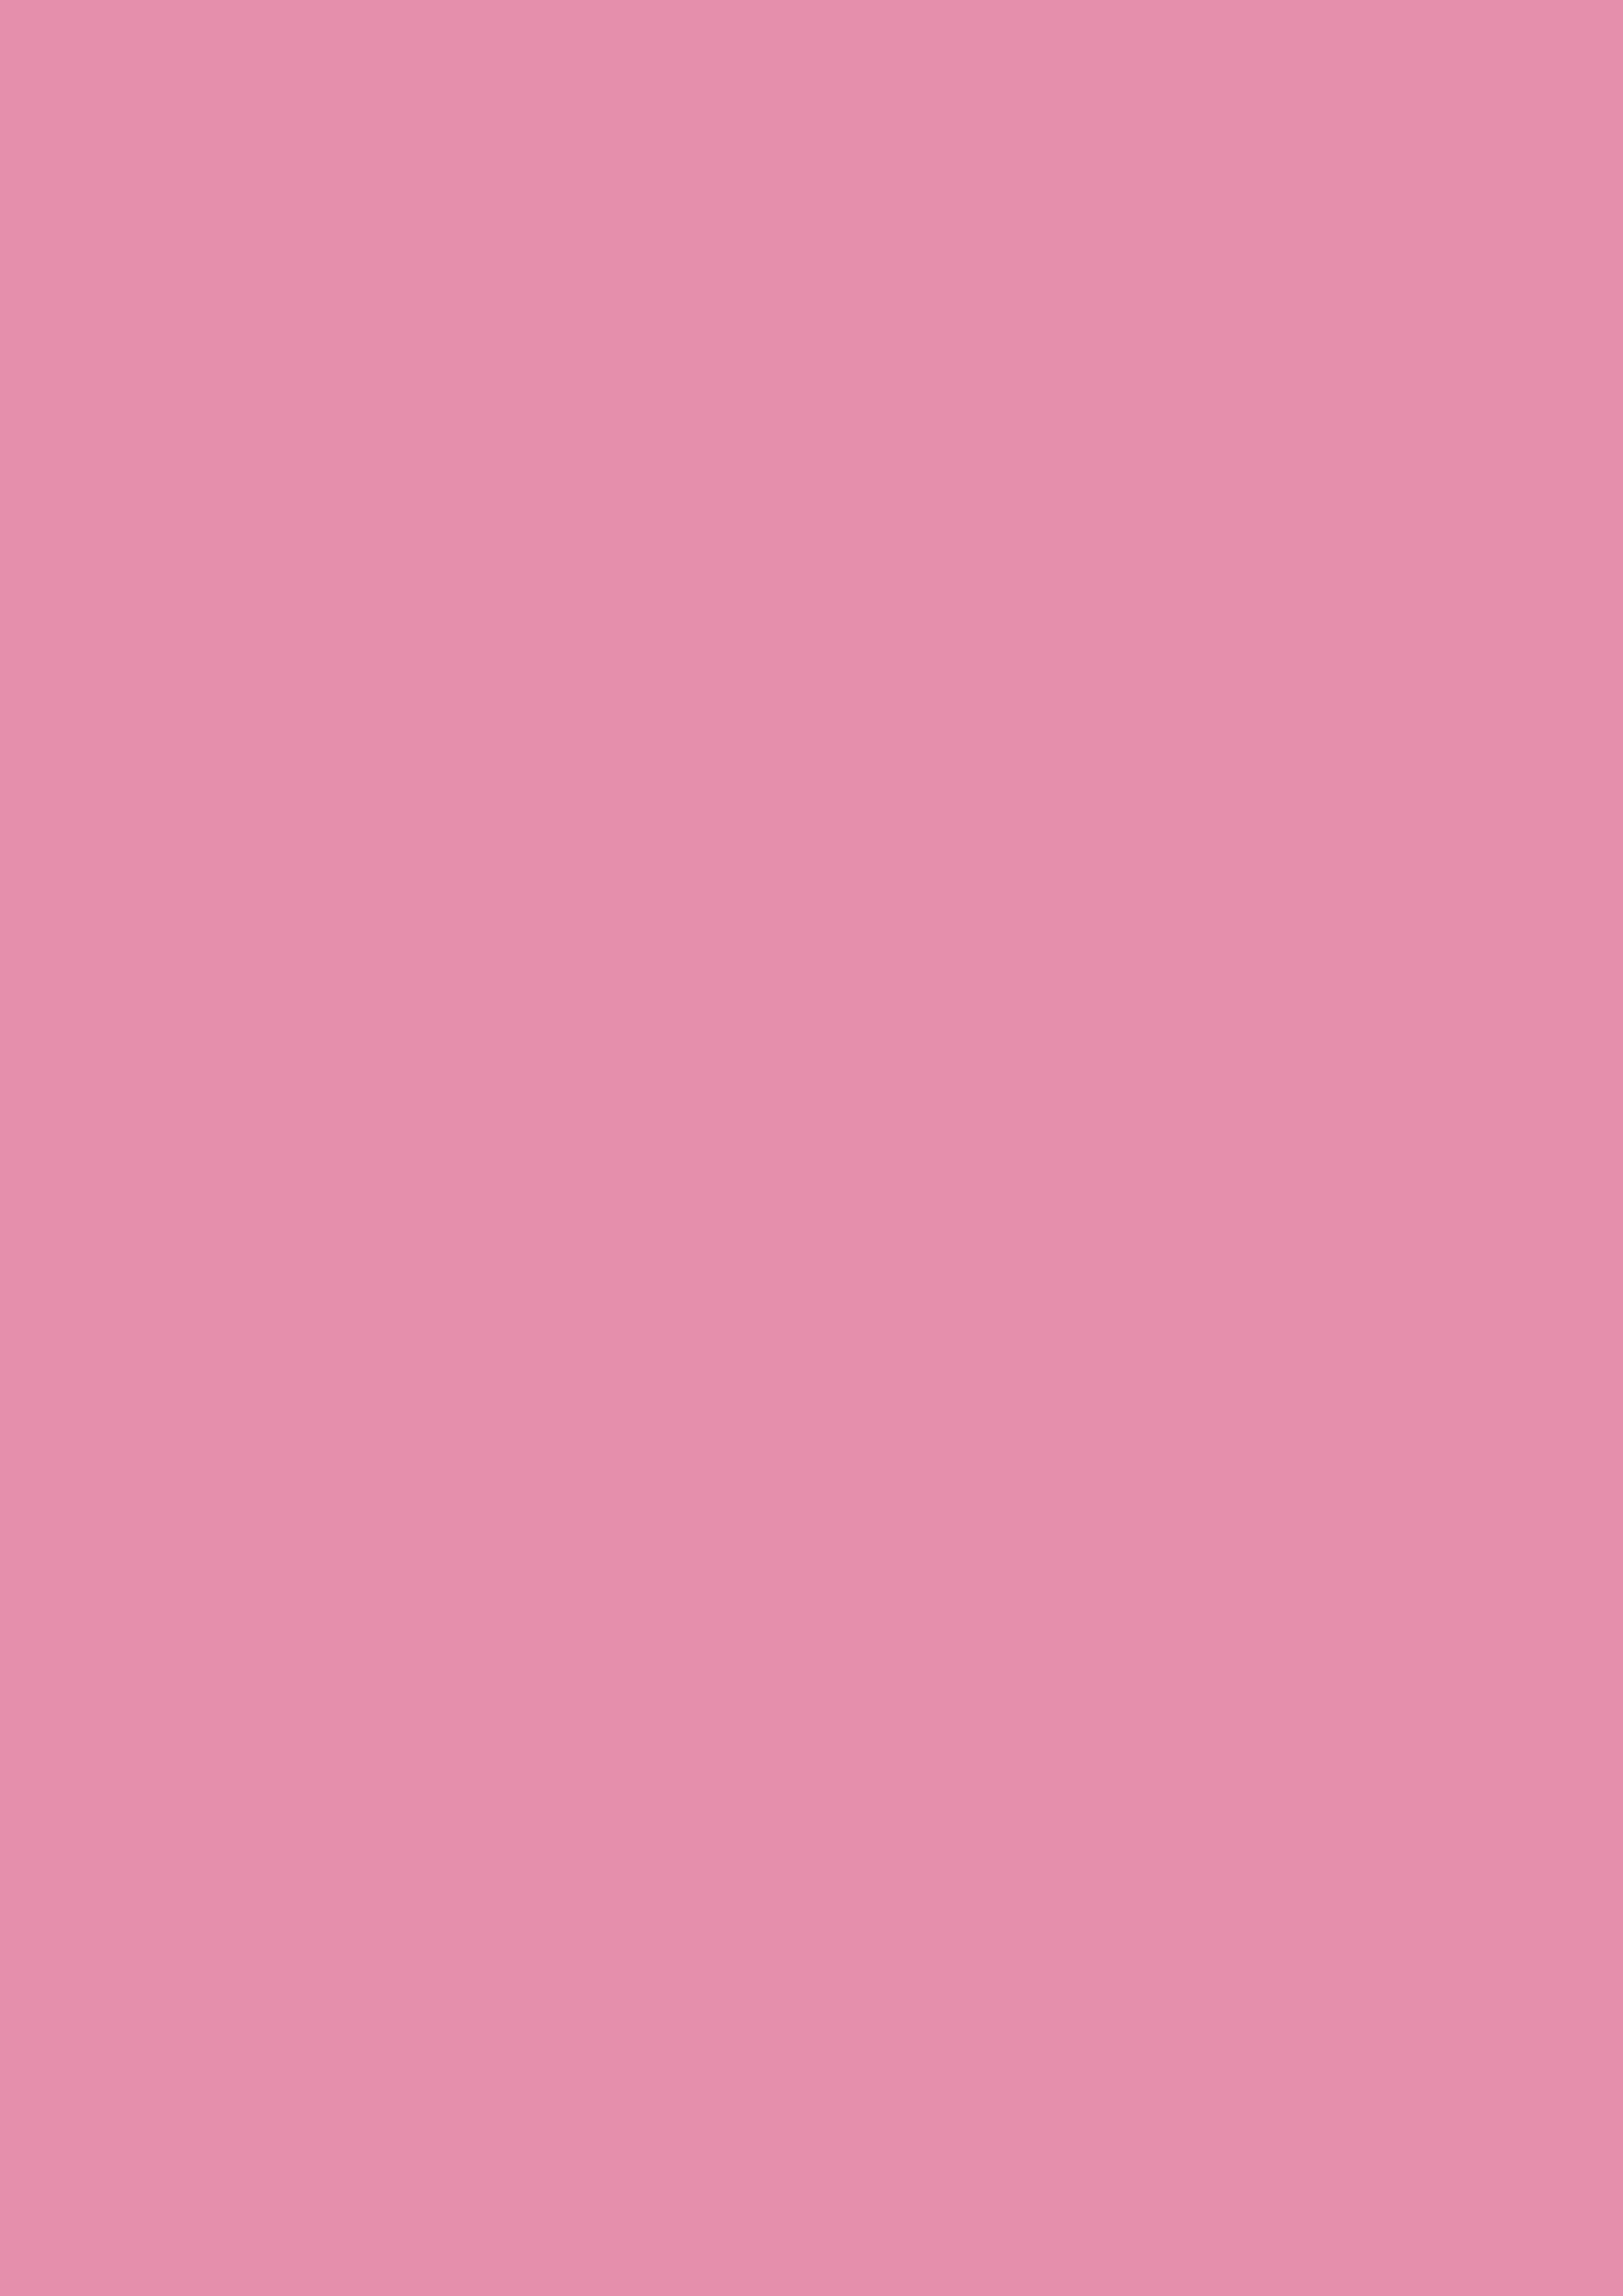 2480x3508 Charm Pink Solid Color Background